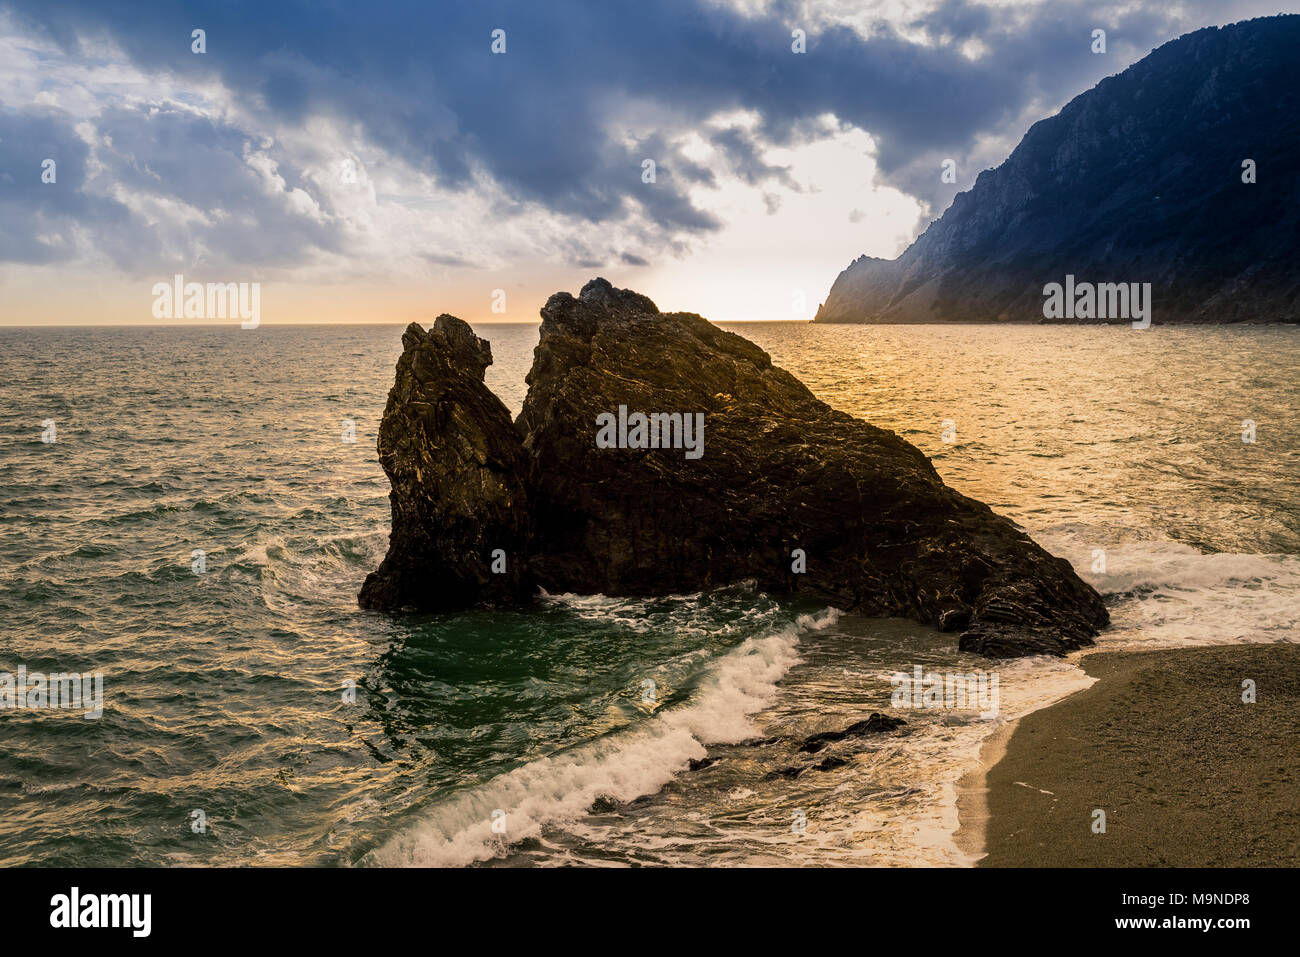 Black dark rock eroded cliff rising from the sea ocean close to a sandy beach with mountain in the background Stock Photo